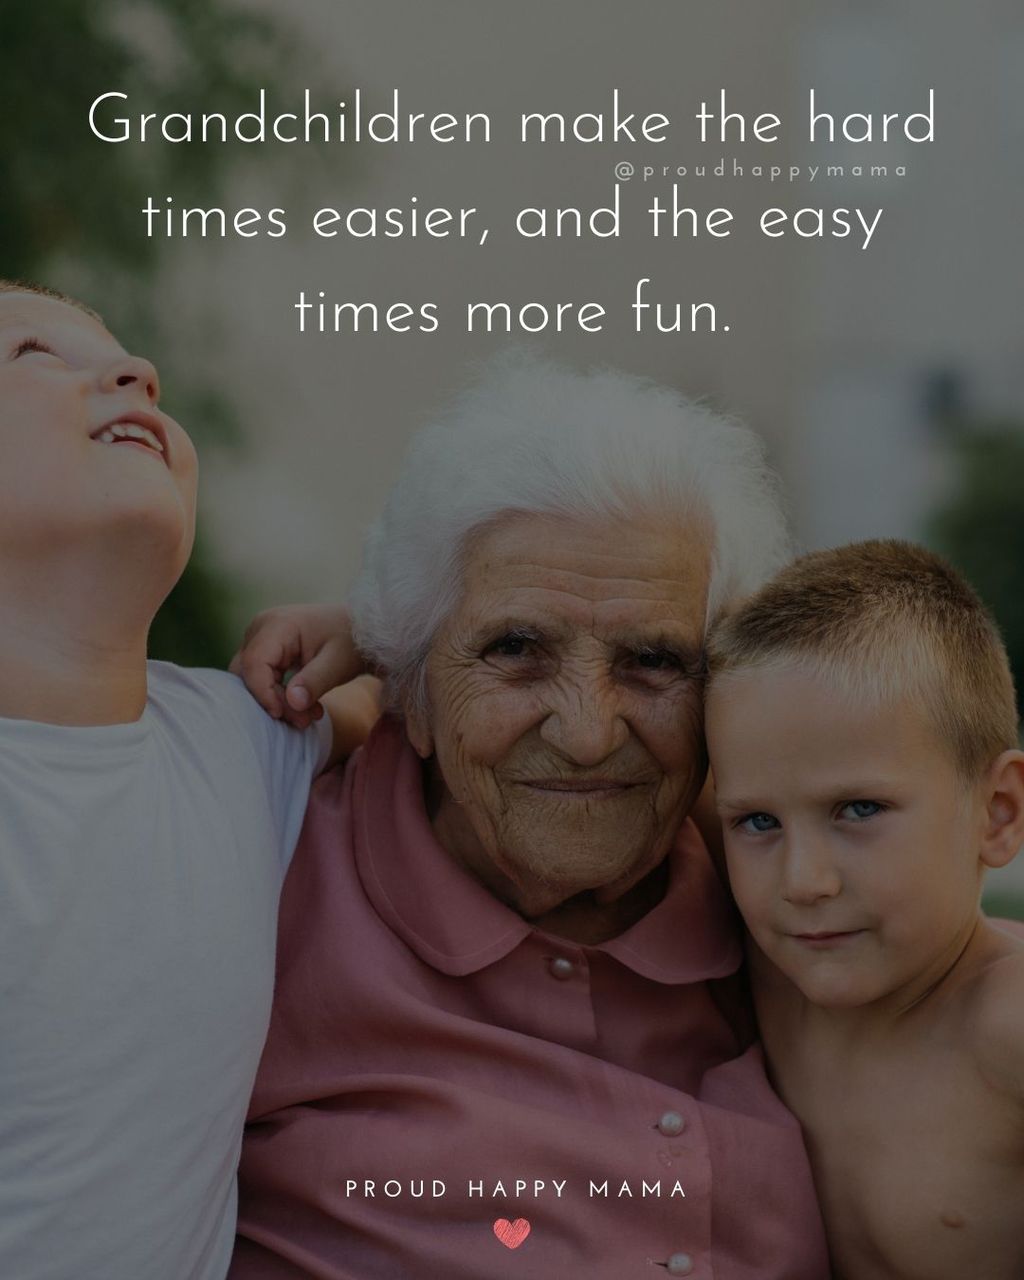 Quotes for Grandchildren - Grandchildren make the hard times easier, and the easy times more fun.